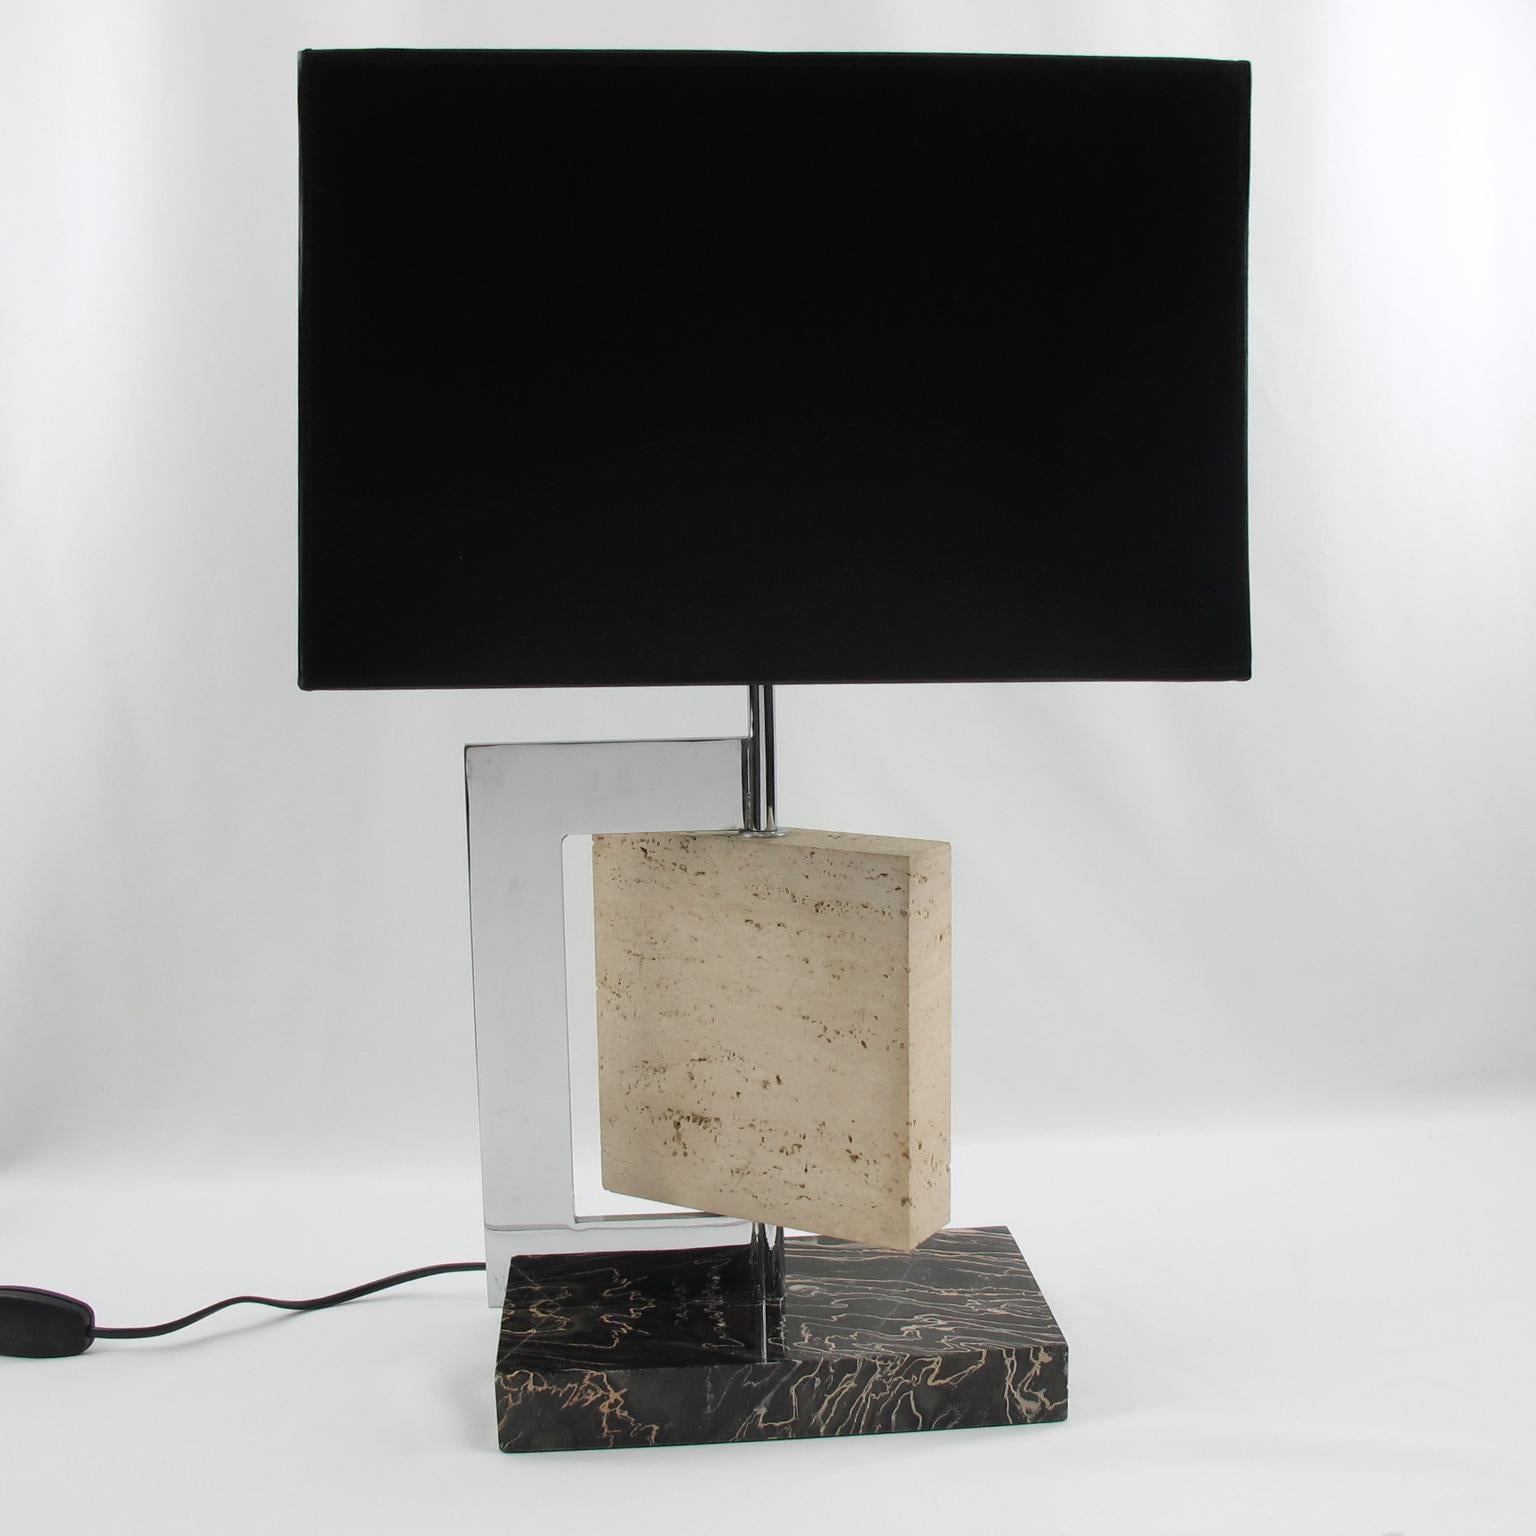 Stunning French Art Deco table lamp, reminiscent of Paul Dupre Lafon work. This elegant desk or table lamp features large Portor marble base plinth with travertine and chromed bronze body. Versatile geometric shape that allows to change the design